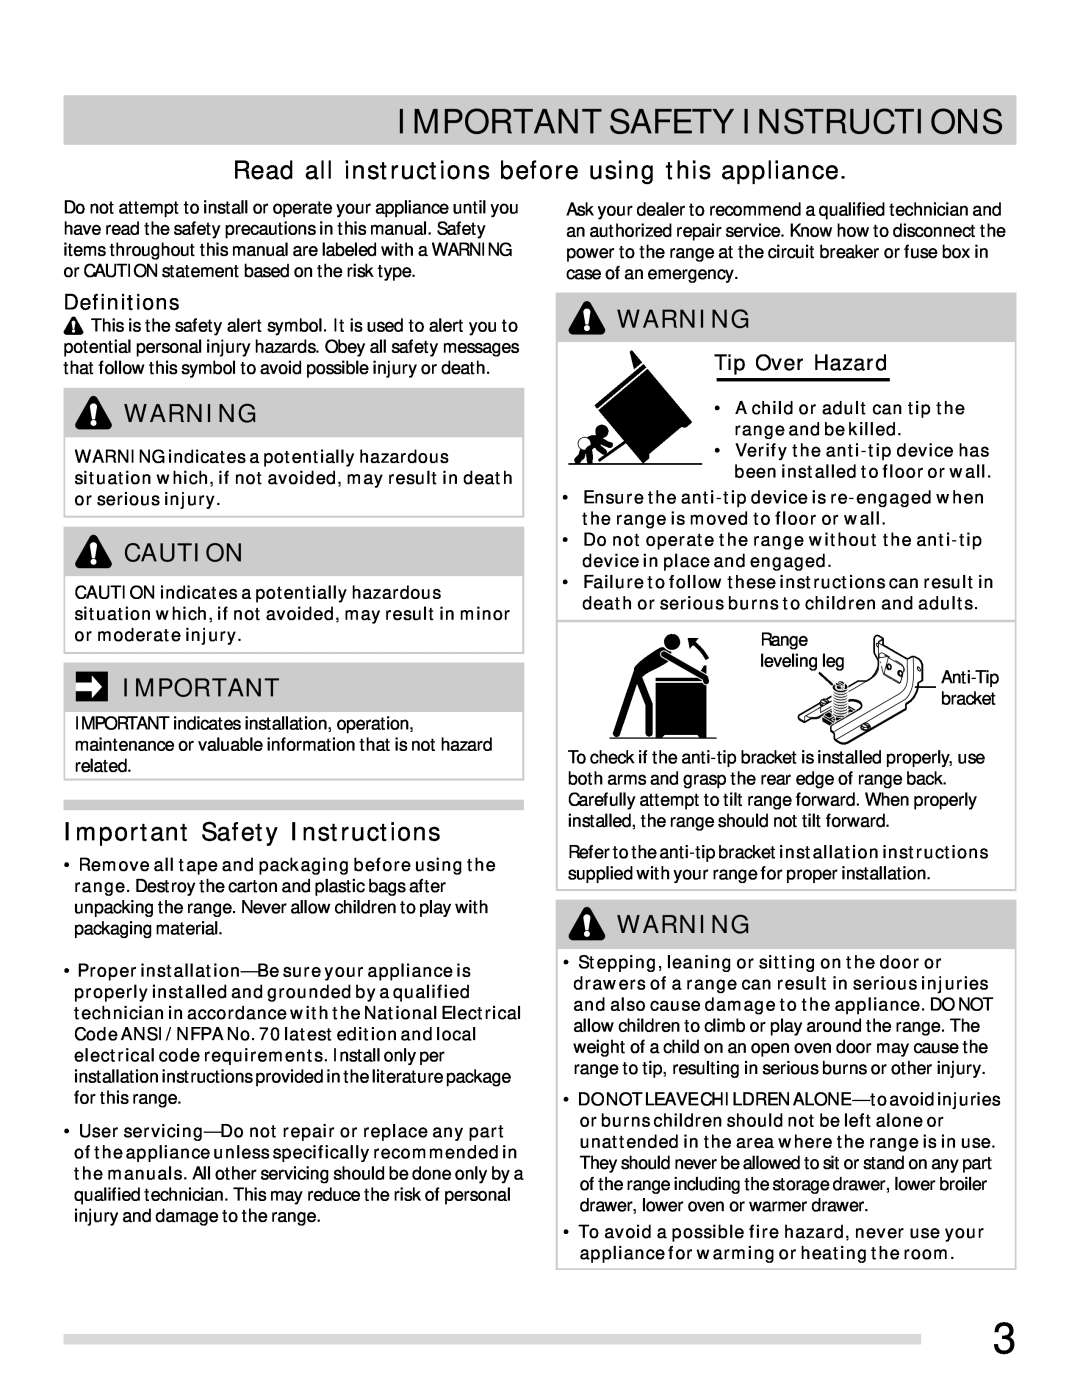 Frigidaire 316902315 Important Safety Instructions, Read all instructions before using this appliance, Definitions 